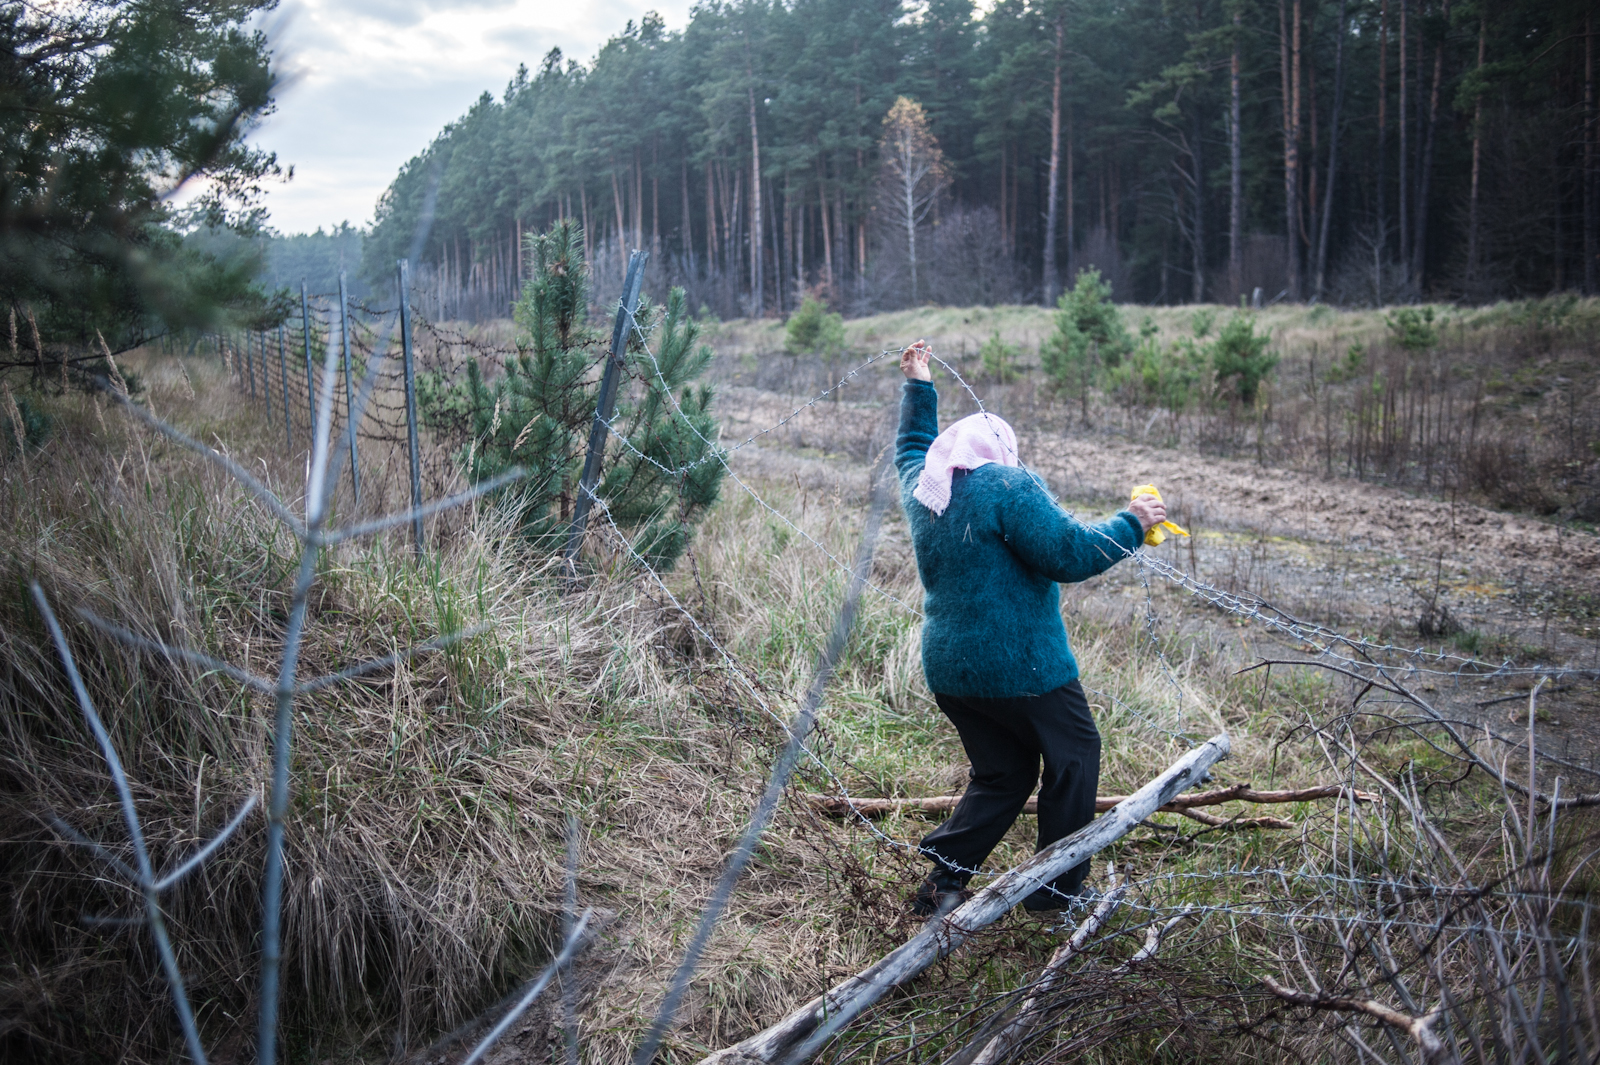 A woman illegally crosses into the forbidden forests of the Exclusion Zone